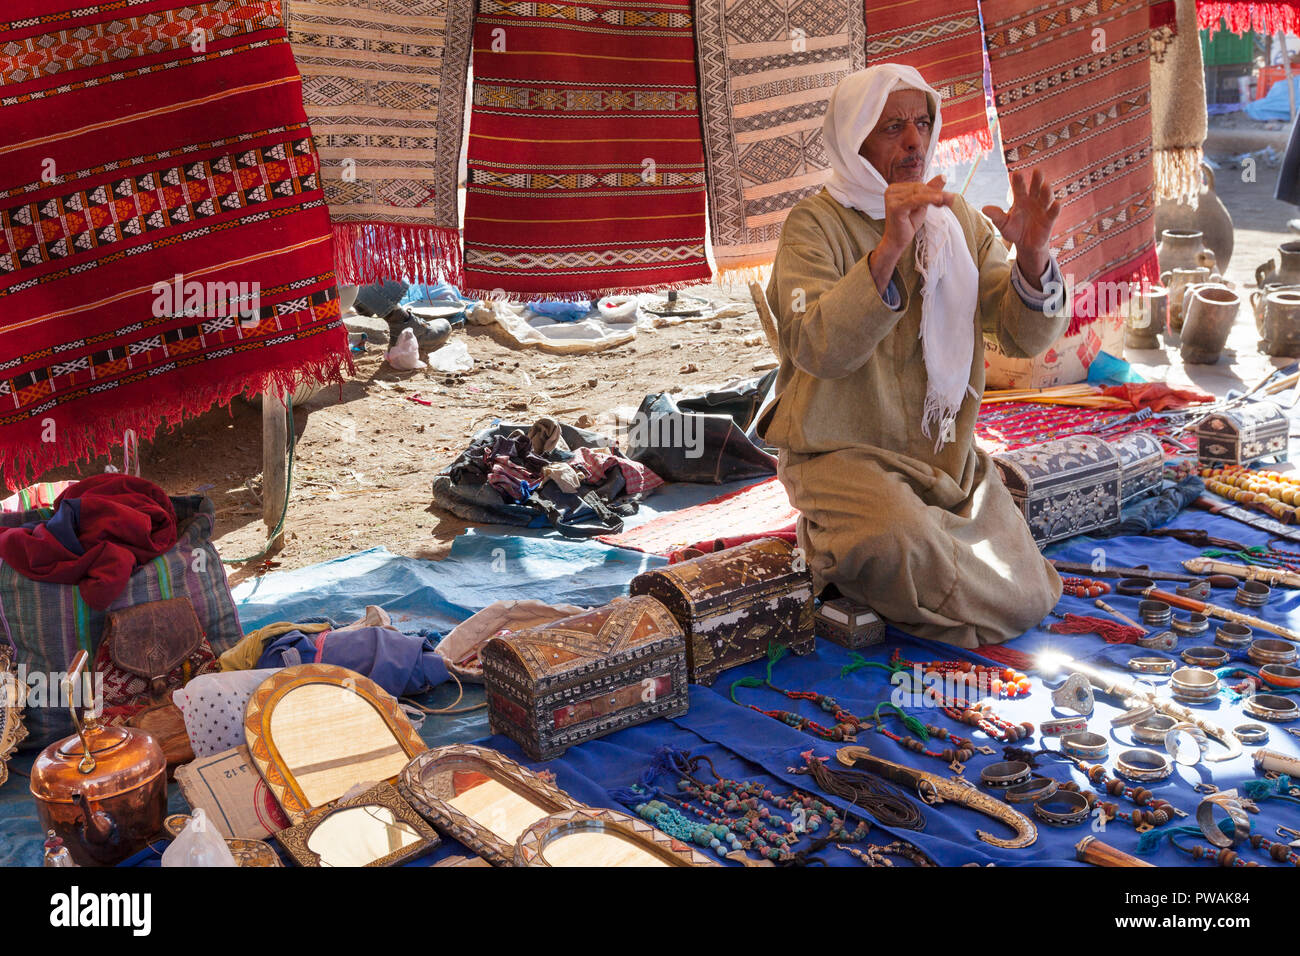 Morocco outdoor souk market. Merchant selling rugs and jewelry interacts with shoppers. Colorful image Stock Photo